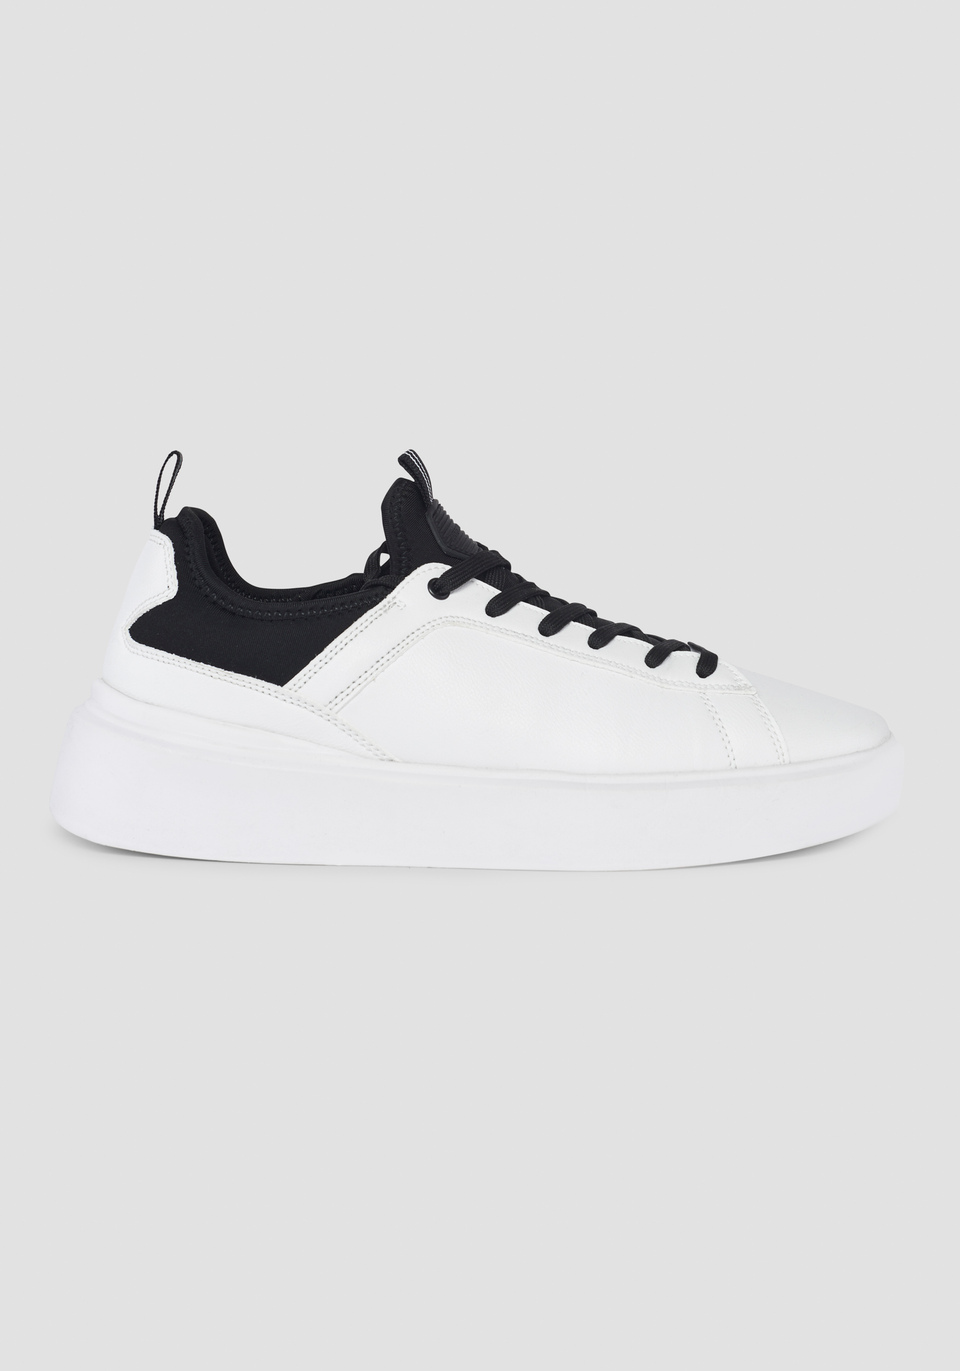 "BARNET" SNEAKER IN FAUX LEATHER AND TECHNICAL FABRIC - Antony Morato Online Shop